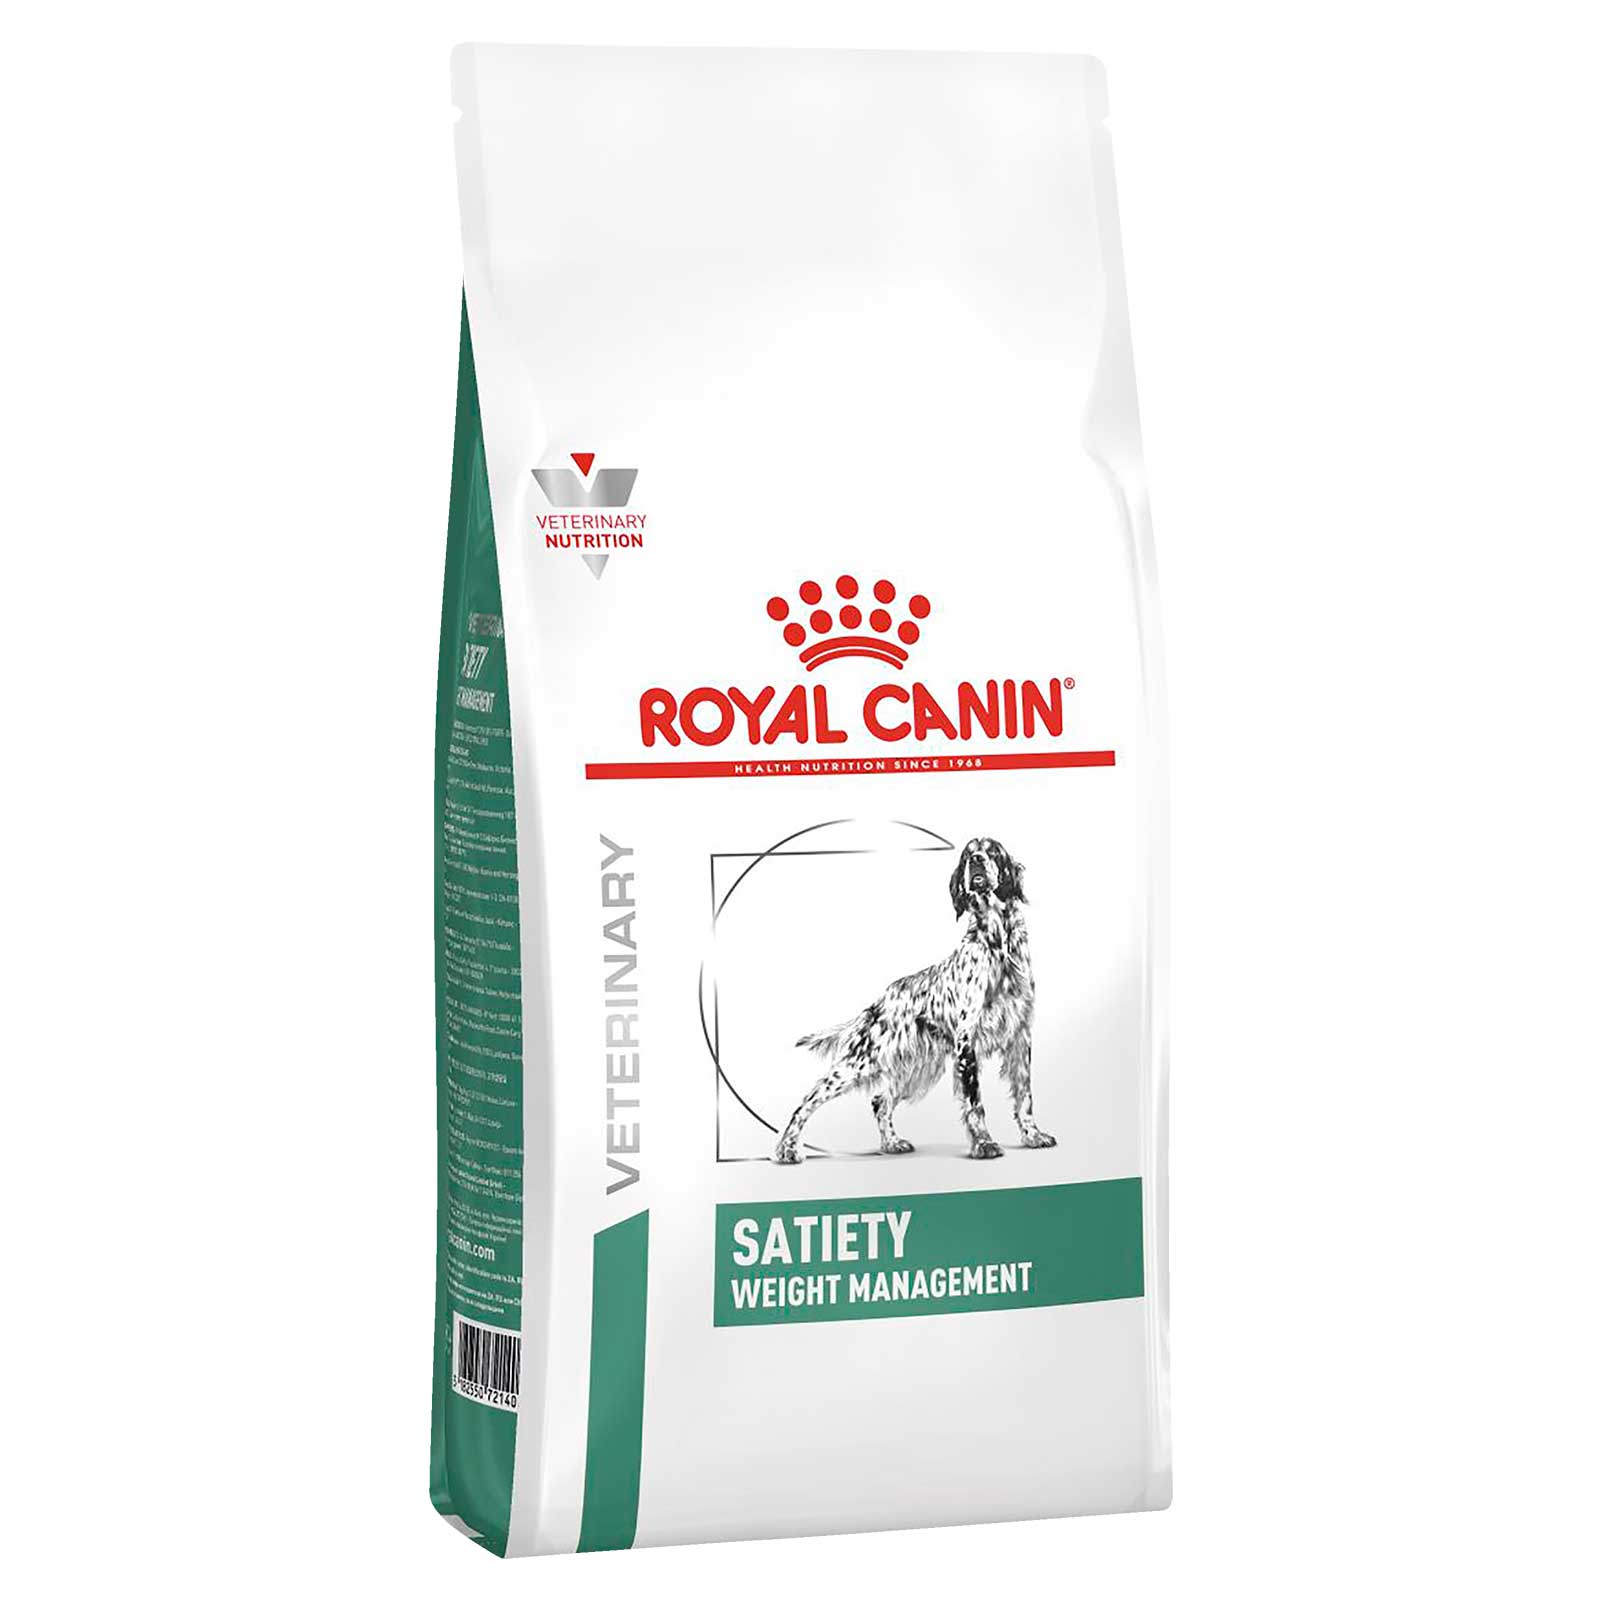 Royal Canin Veterinary Dog Food Satiety Weight Management